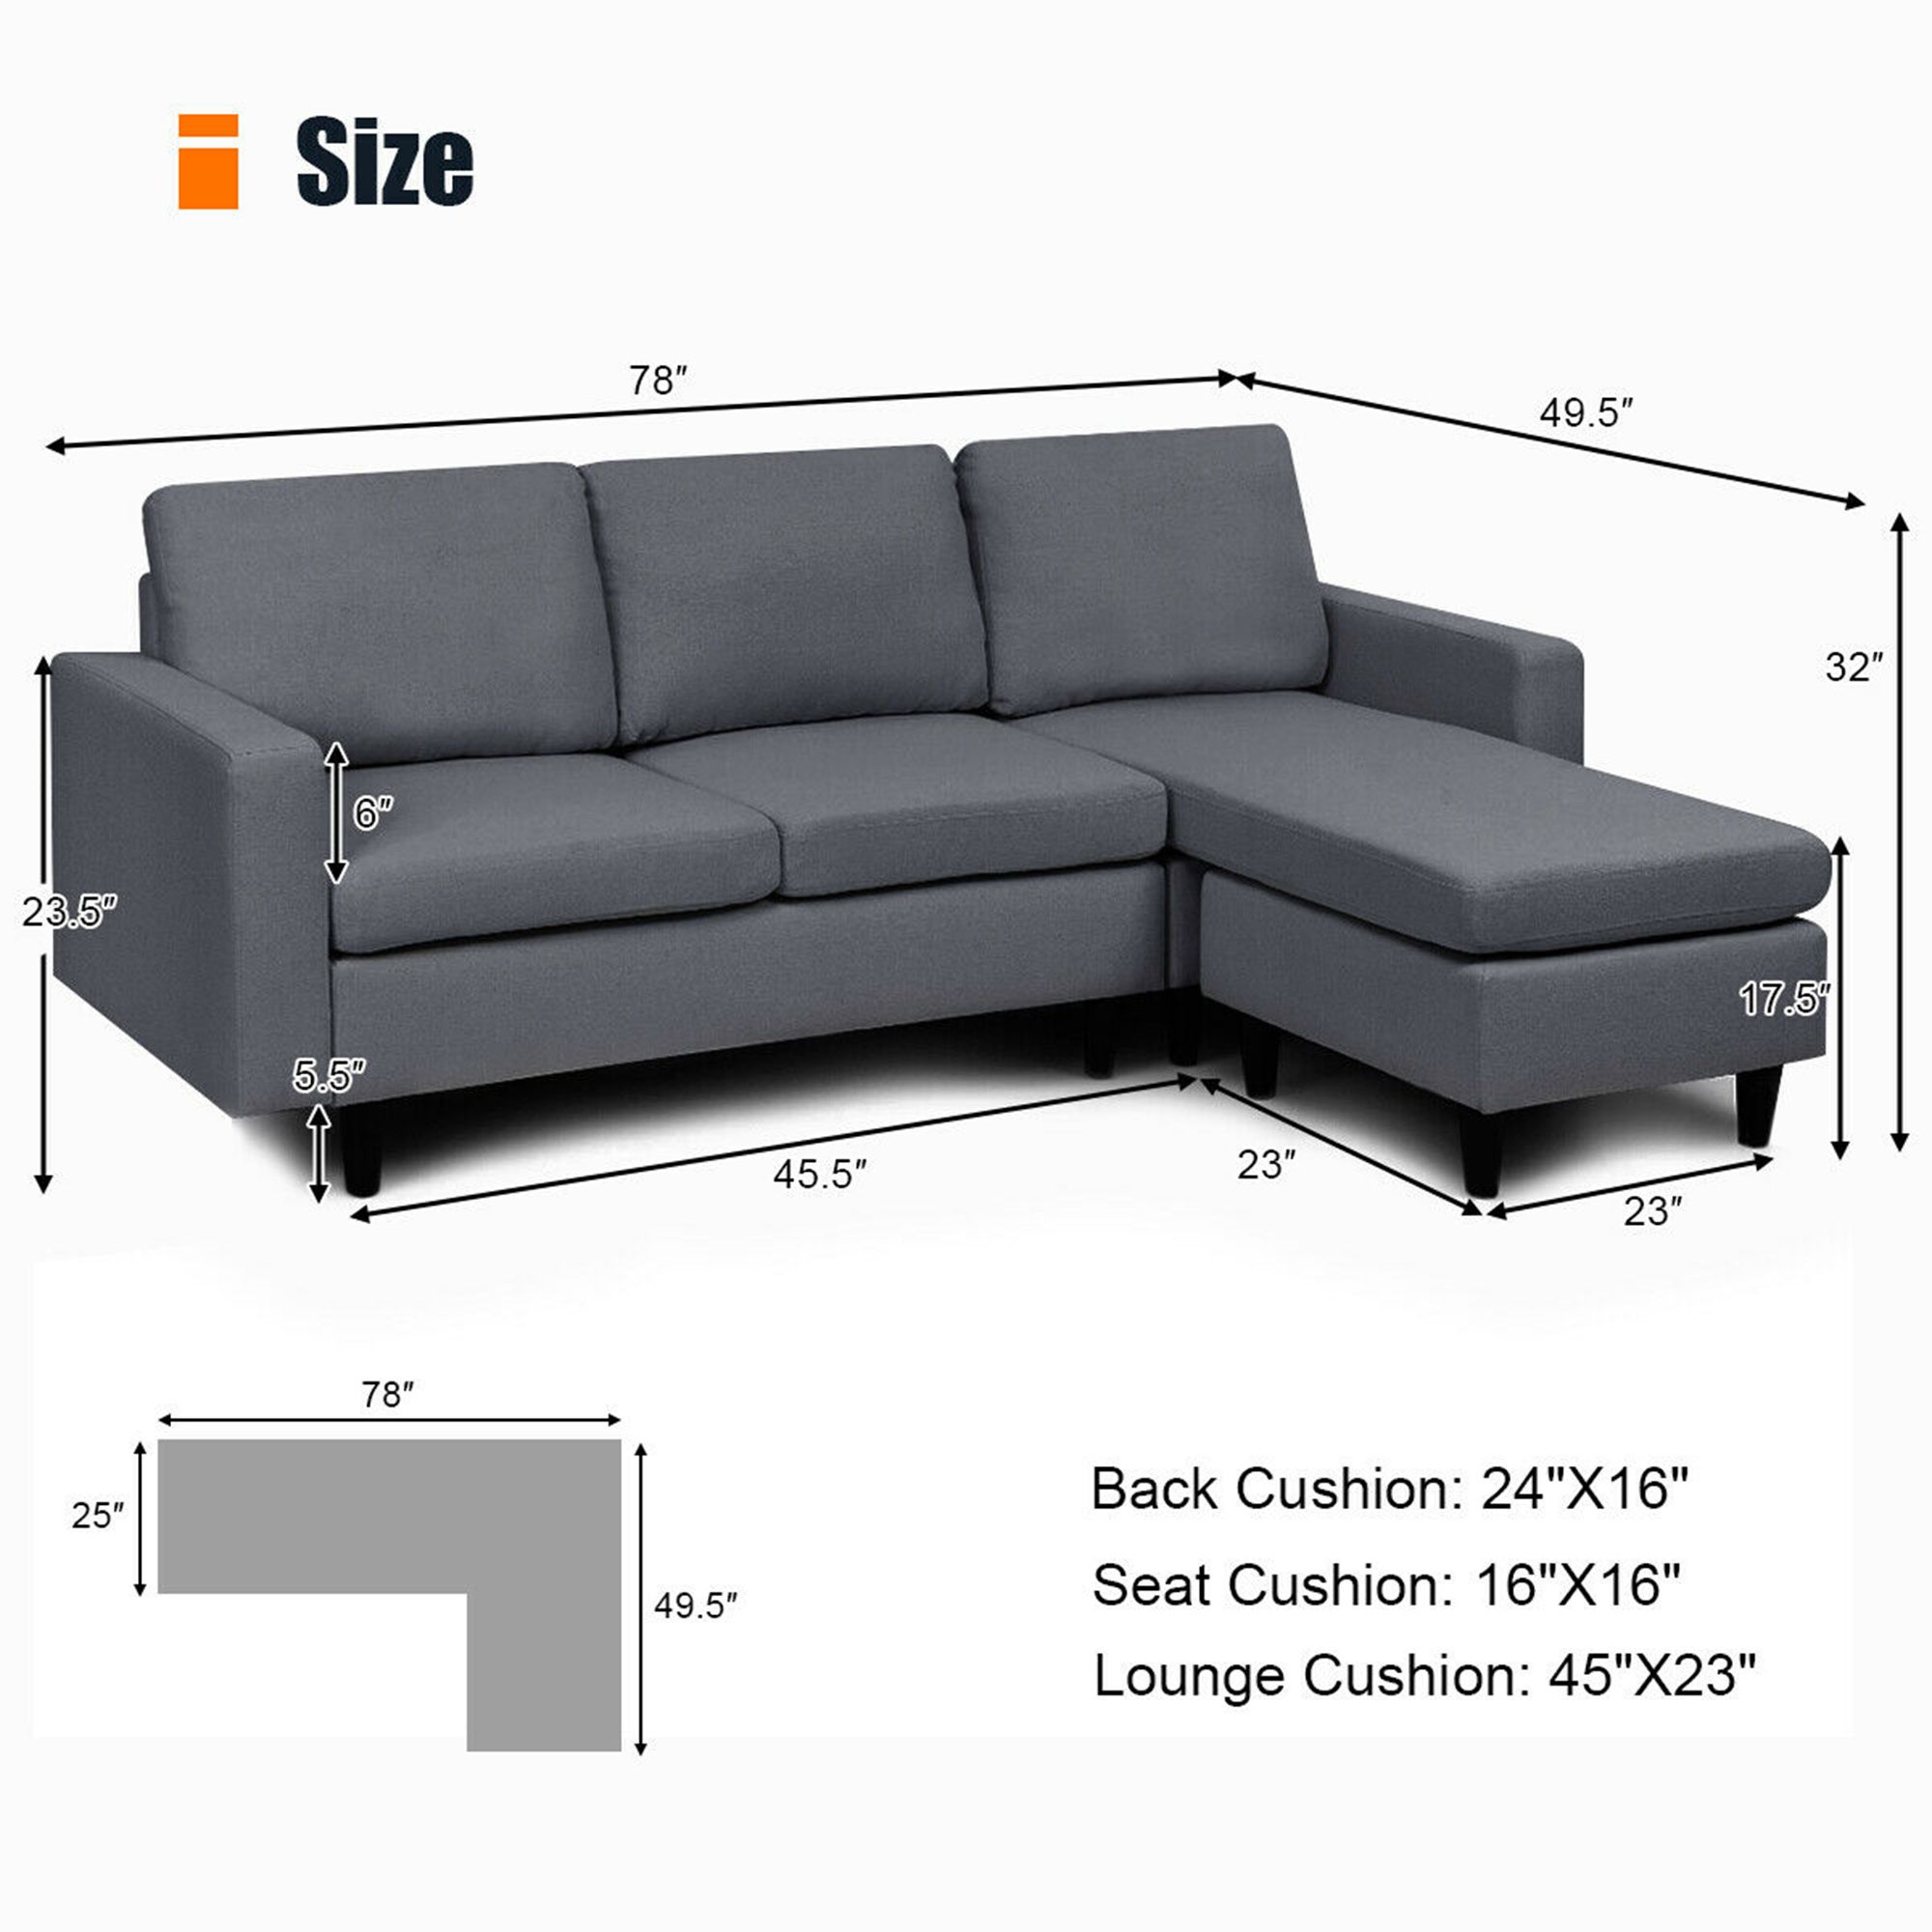 Convertible L Shaped Sectional Sofa Couch W/ Cushion Dark Gray | Ebay For Convertible L Shaped Sectional Sofas (Gallery 15 of 20)